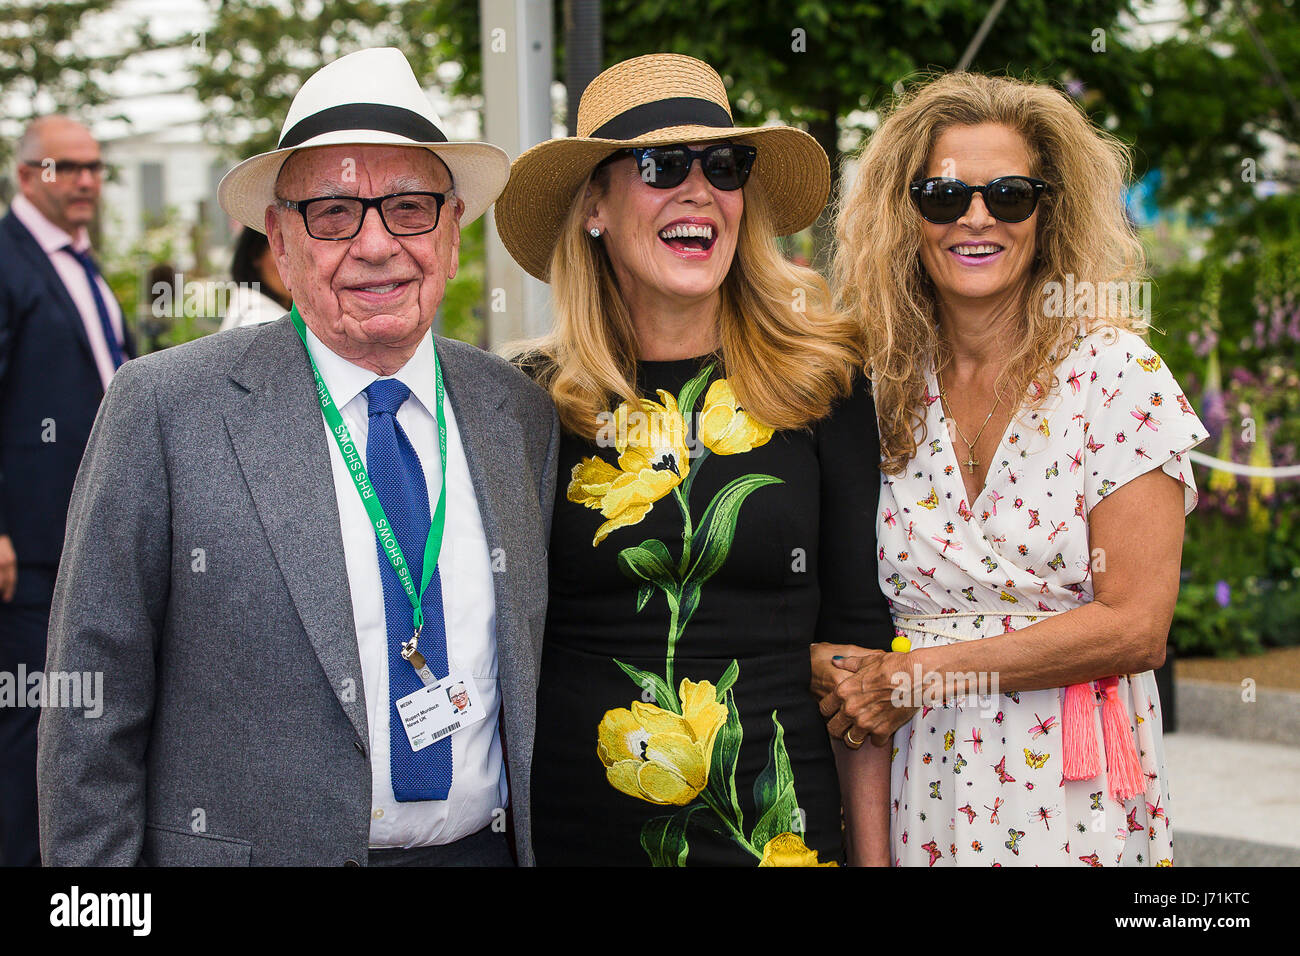 Chelsea London, UK. 22nd May, 2017. Rupert Murdoch, Australian-born American media mogul and His Wife Jerry Murdoch together with Suzanne Wyman ife of former Rolling Stone Bill Wyman pose for photographers at Chelsea Flower Sow 2017 Credit: David Betteridge/Alamy Live News Stock Photo